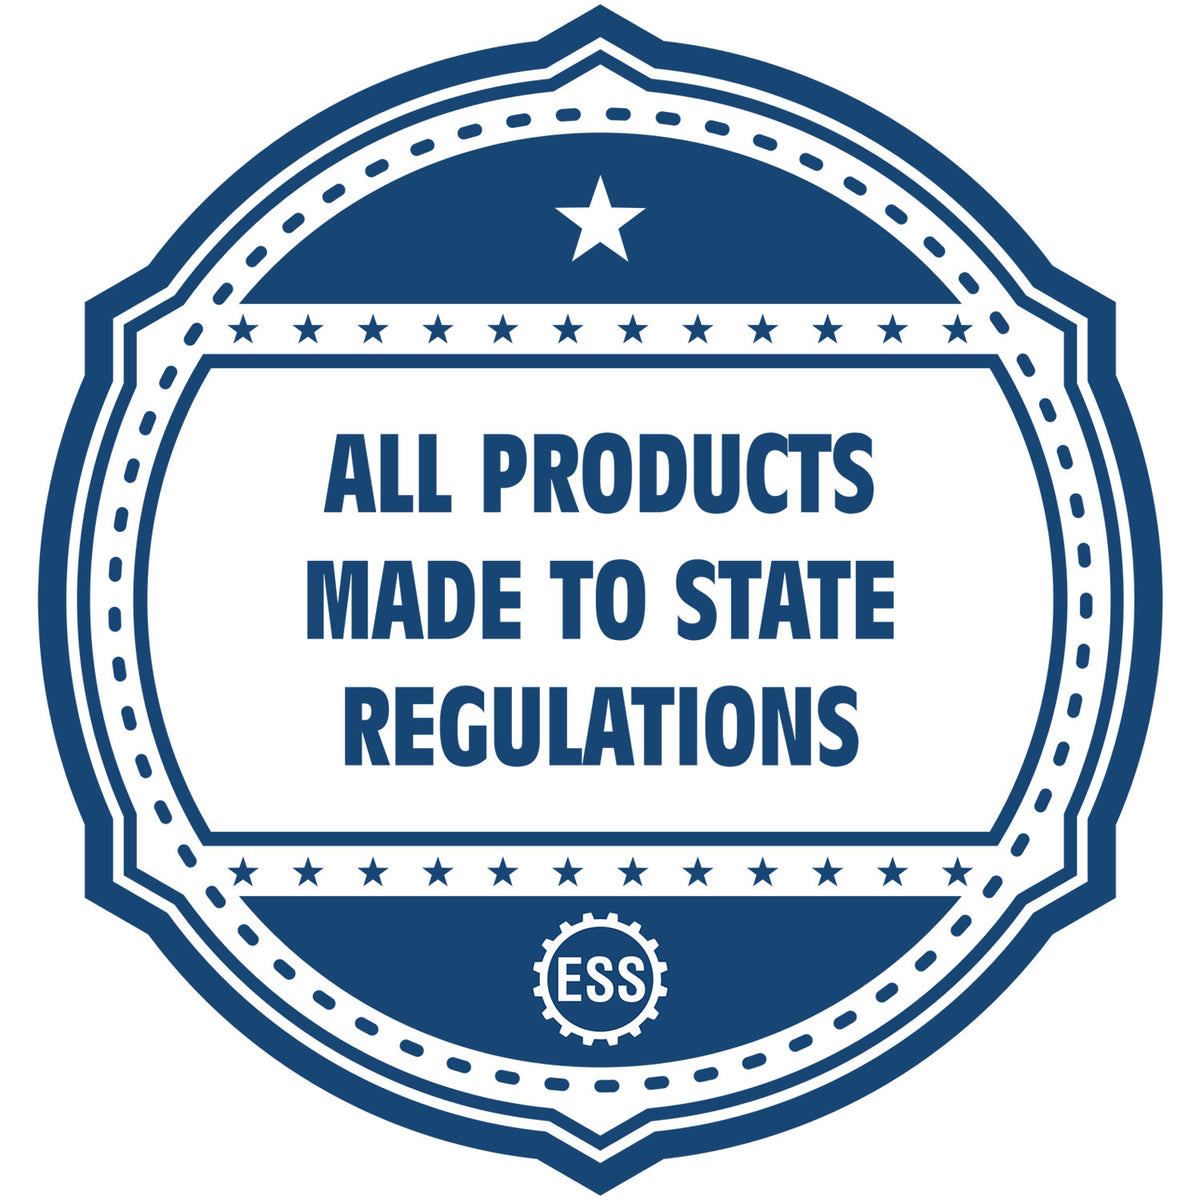 An icon or badge element for the Handheld Nebraska Architect Seal Embosser showing that this product is made in compliance with state regulations.